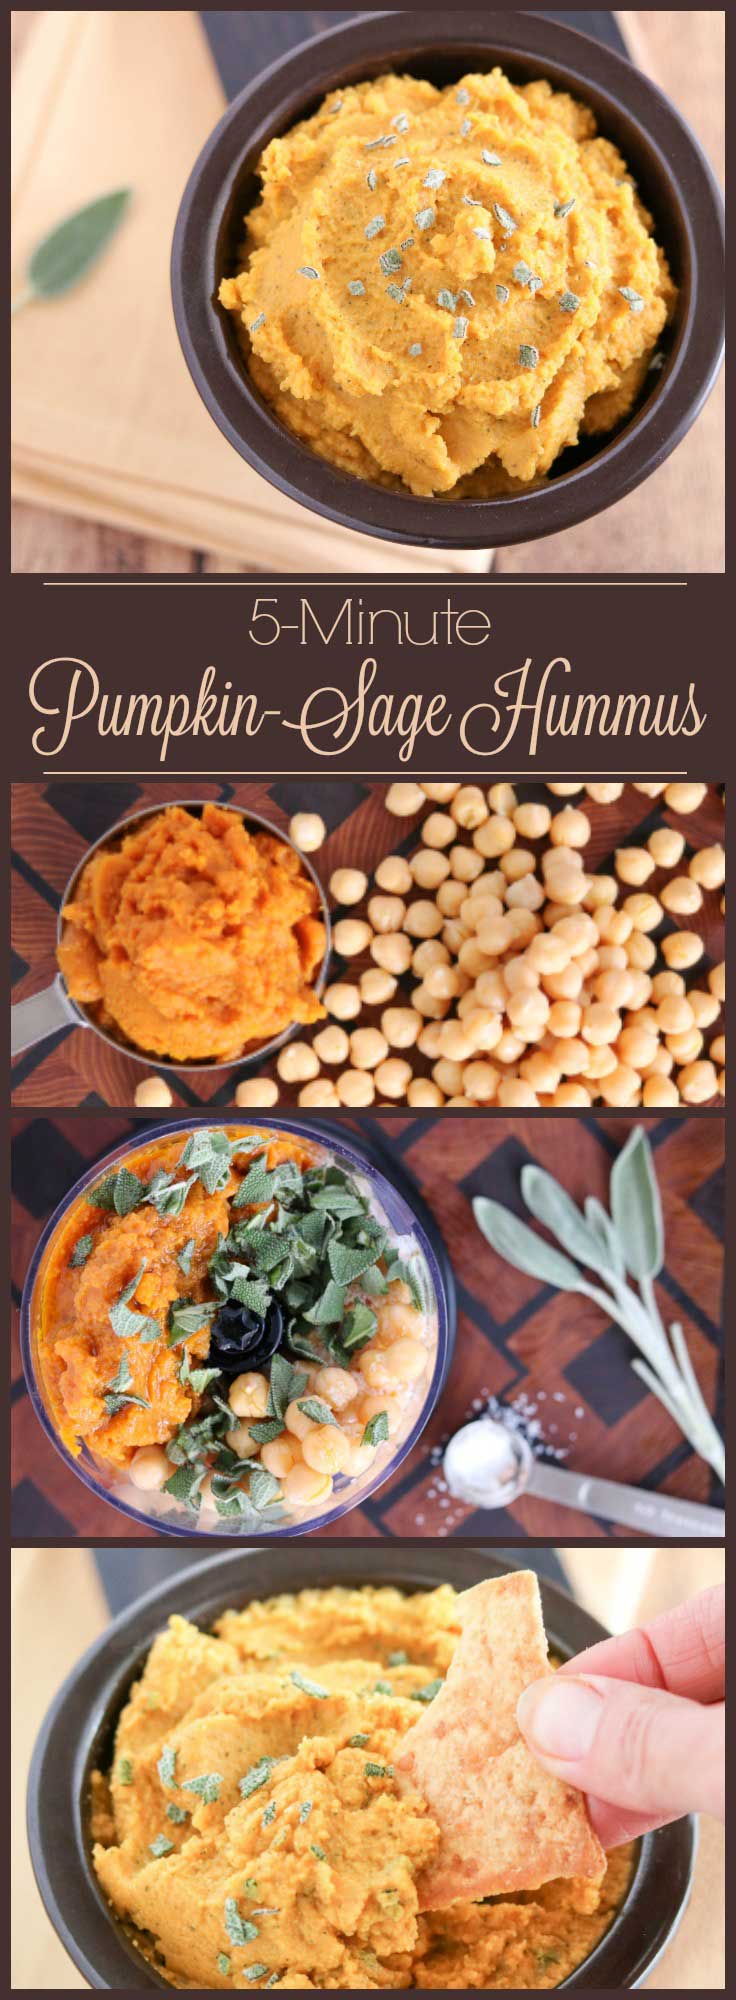 Just 5 ingredients, ready in 5 minutes flat! This delicious Savory Pumpkin Hummus is filled with the rich, comforting flavors of pumpkin and sage. It's an ideal Halloween snack, Thanksgiving appetizer, or holiday hors d’oeuvre. A quick, healthy appetizer recipe that can even be made ahead! Perfect for parties, and for snacking – a healthy hummus recipe that’s great anytime! If you’re looking for pumpkin recipes, this is a must-try! | www.TwoHealthyKitchens.com